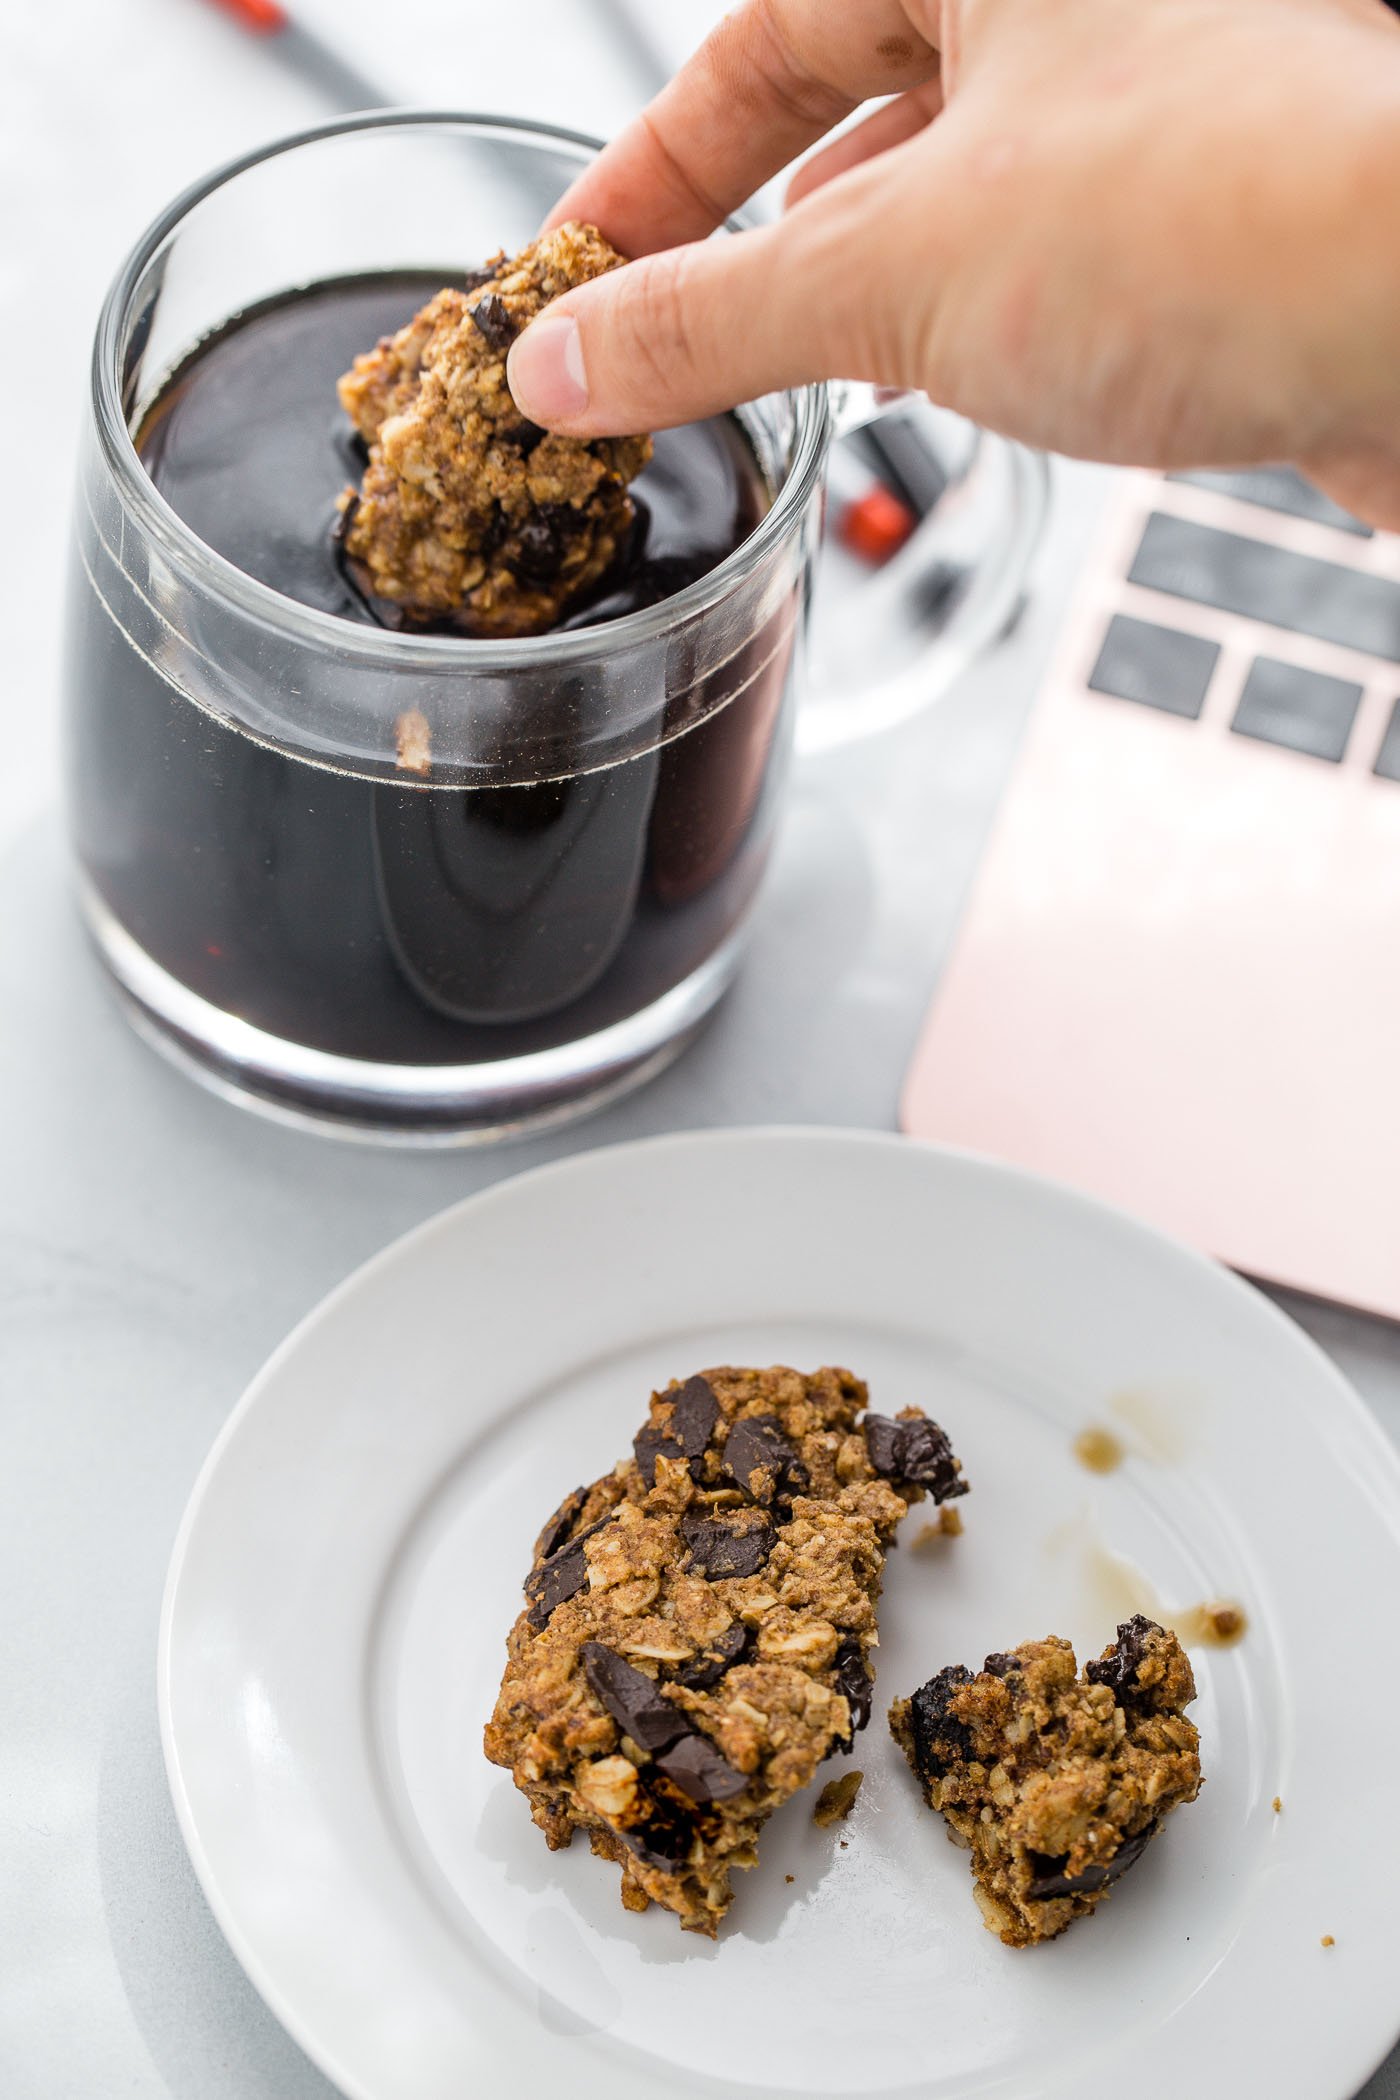 healthy peanut butter breakfast cookies loaded with oats, flax, & dark chocolate chunks! these peanut butter breakfast cookies are the best way to start any day - especially when you dunk 'em into a cup of coffee! #peanutbutter #healthybreakfastrecipe #mealpreprecipe #breakfastcookies #playswellwithbutter